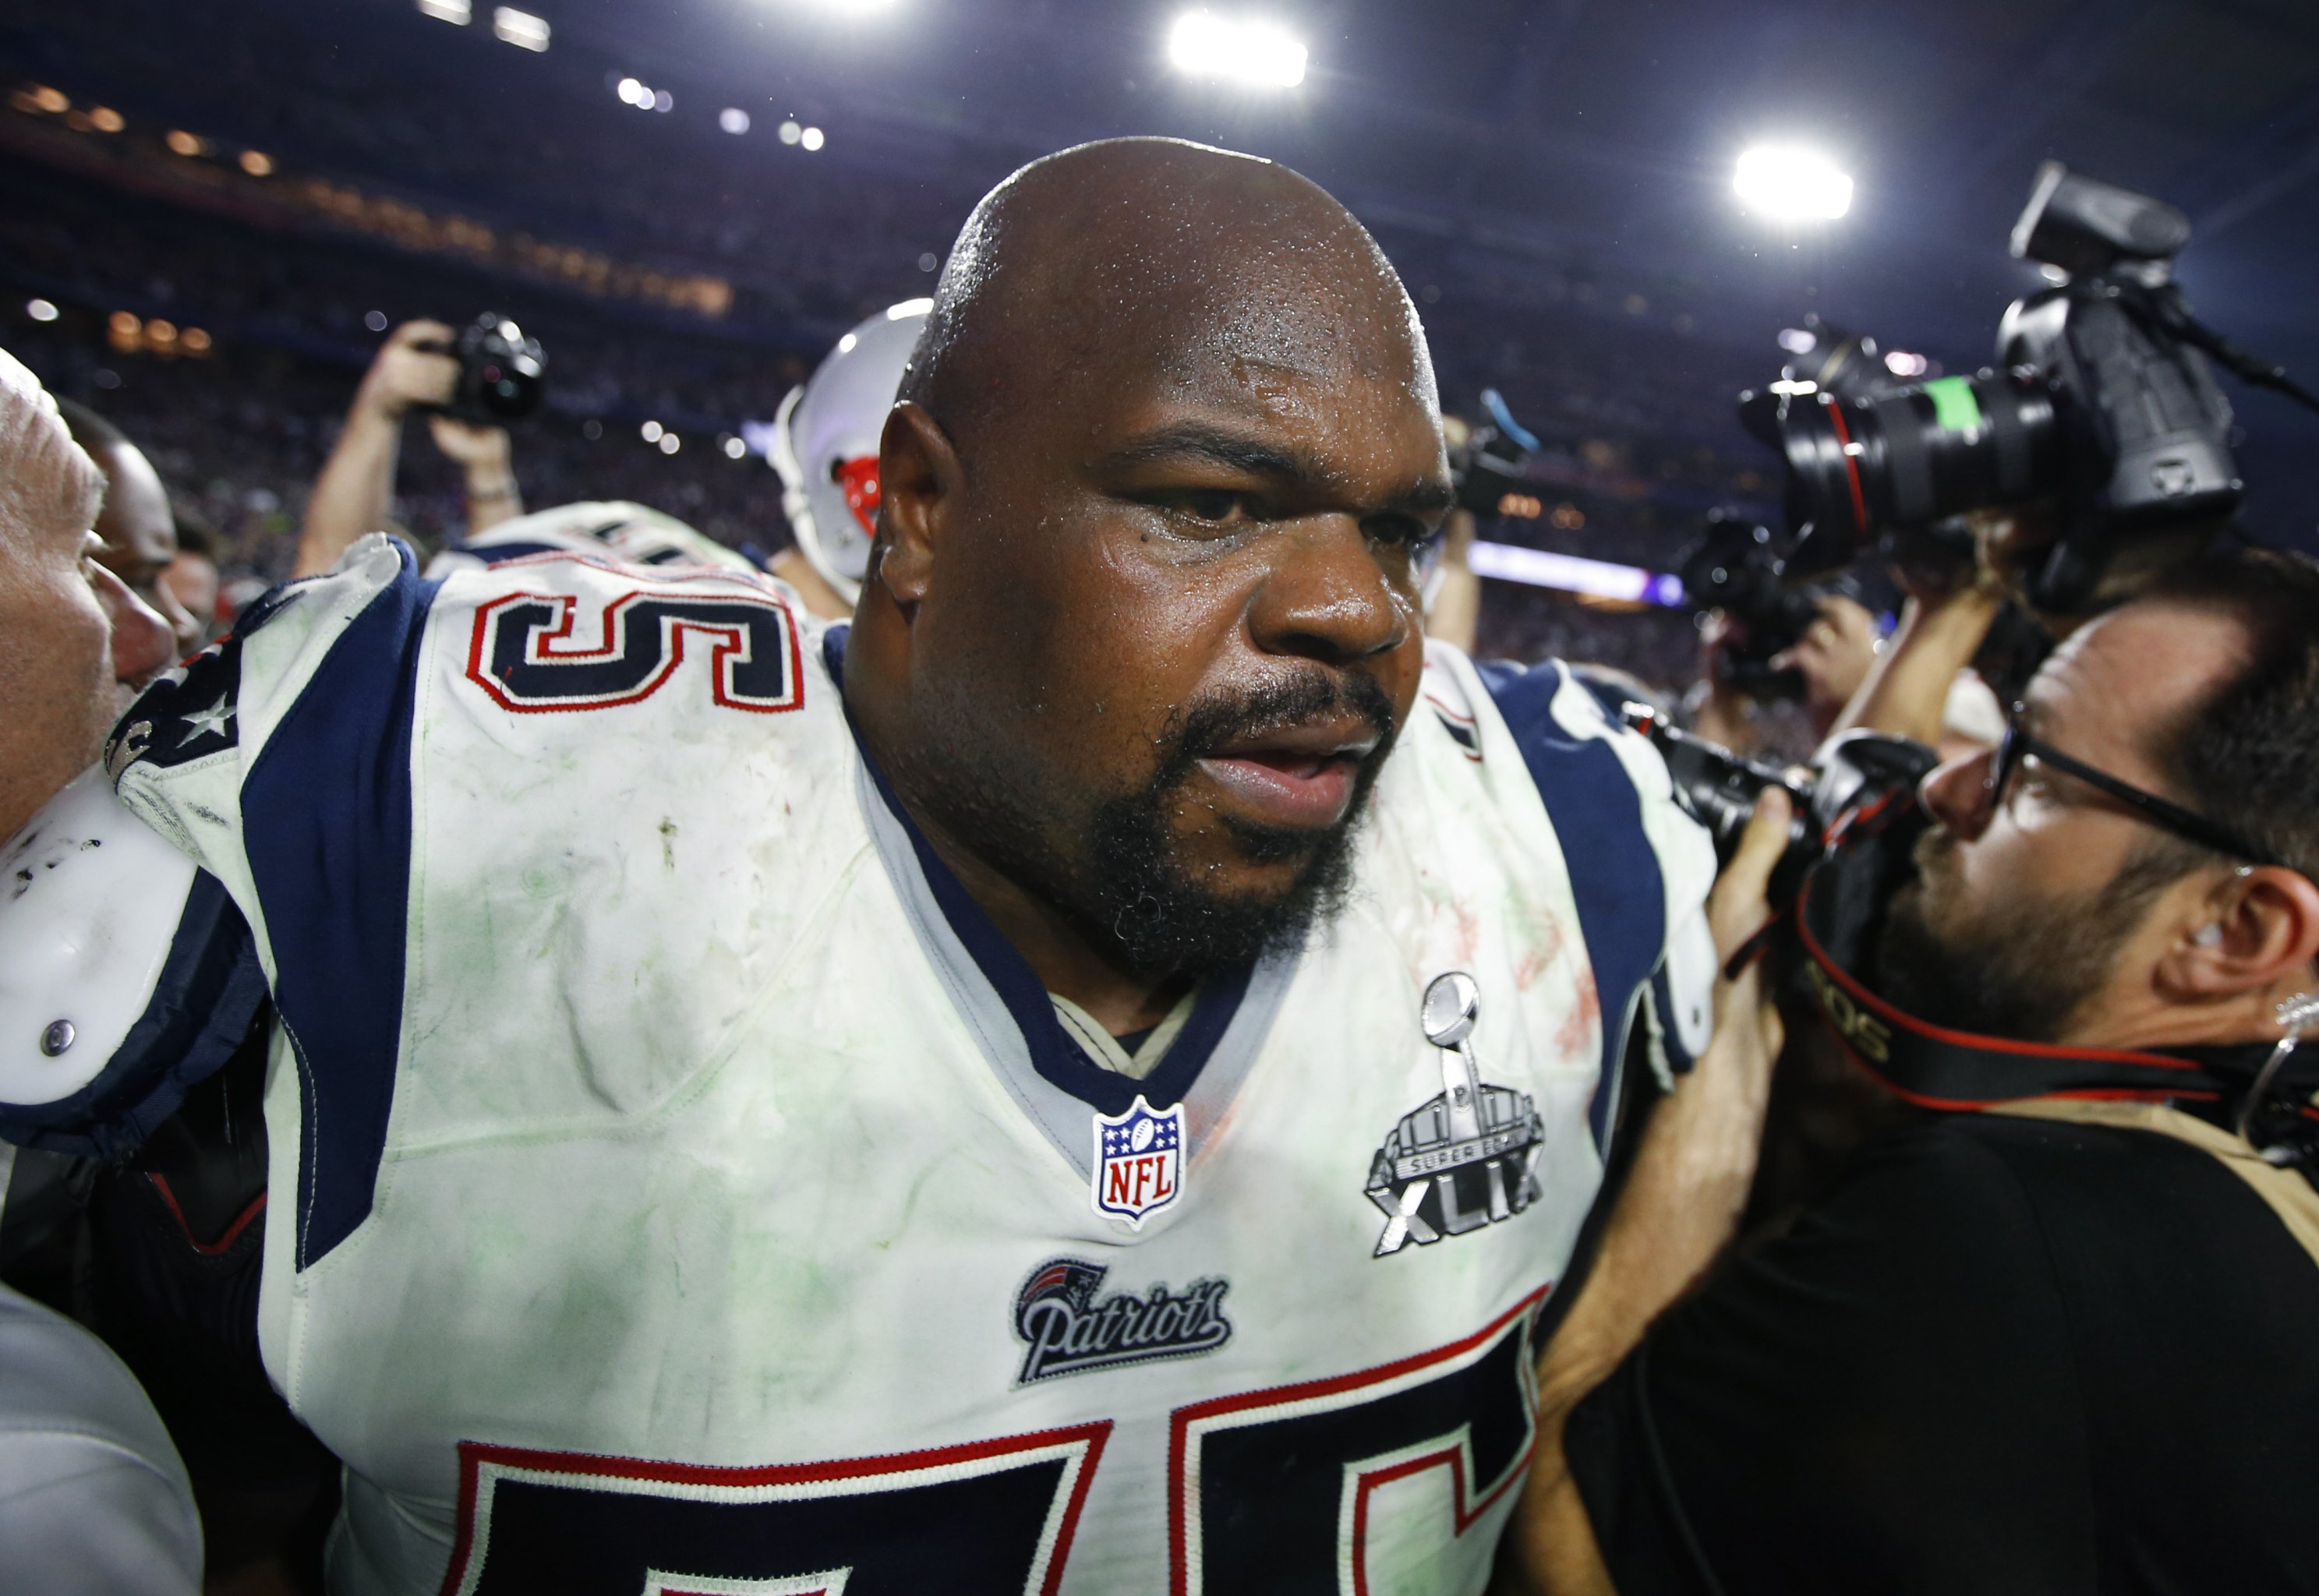 Vince Wilfork out with New England Patriots after team declines option, NFL